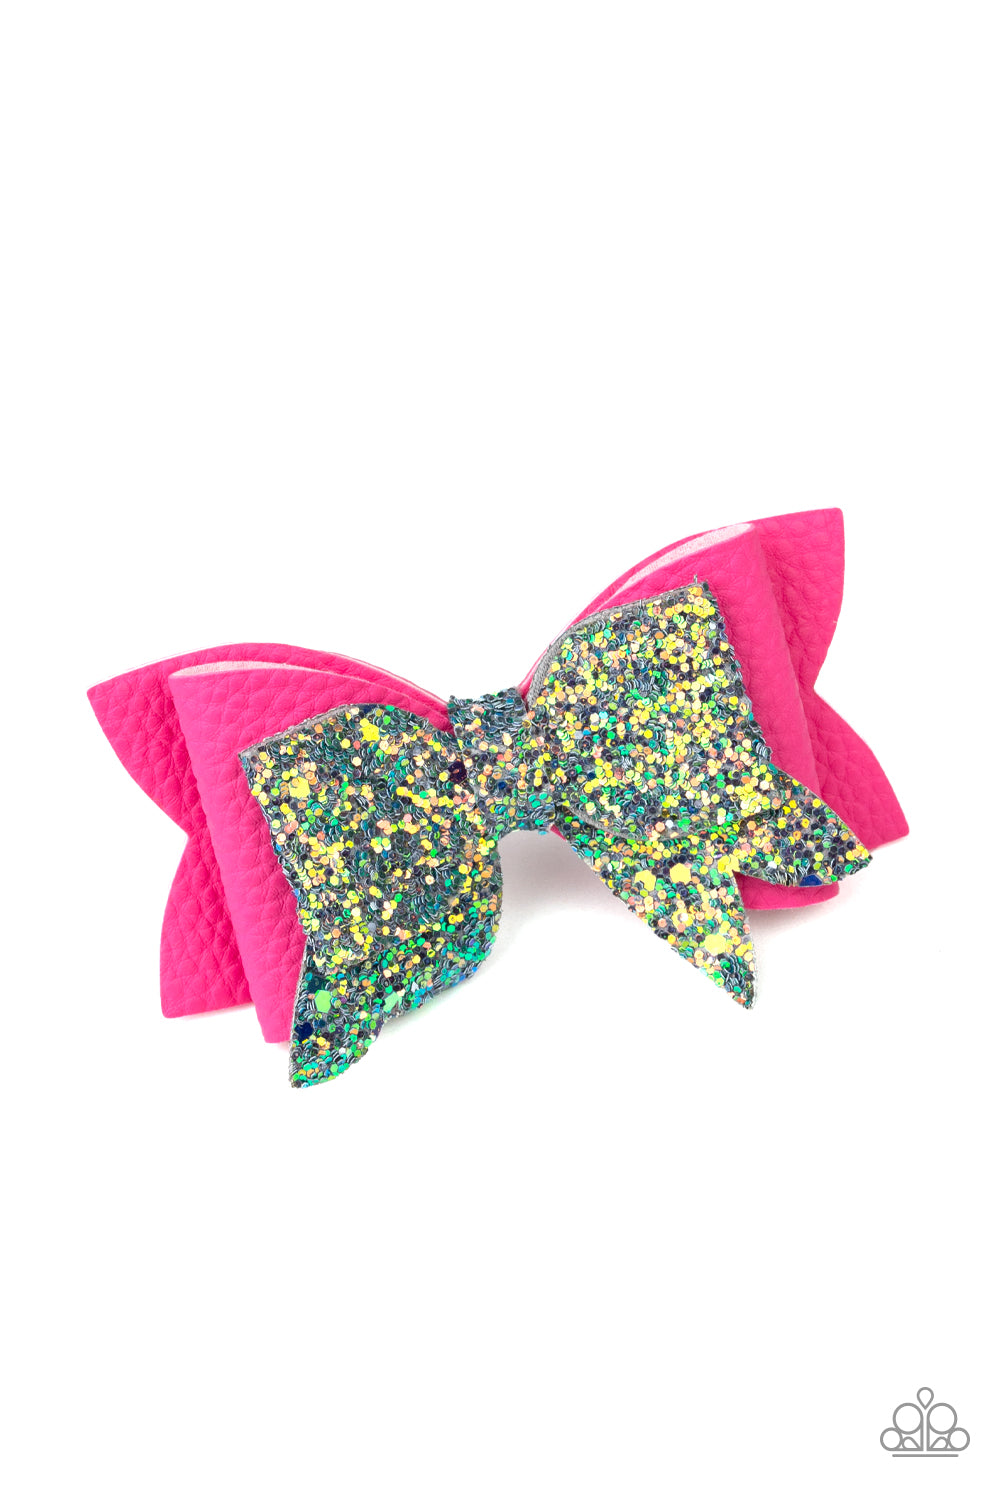 Sugary Sequins Pink Hair Clip